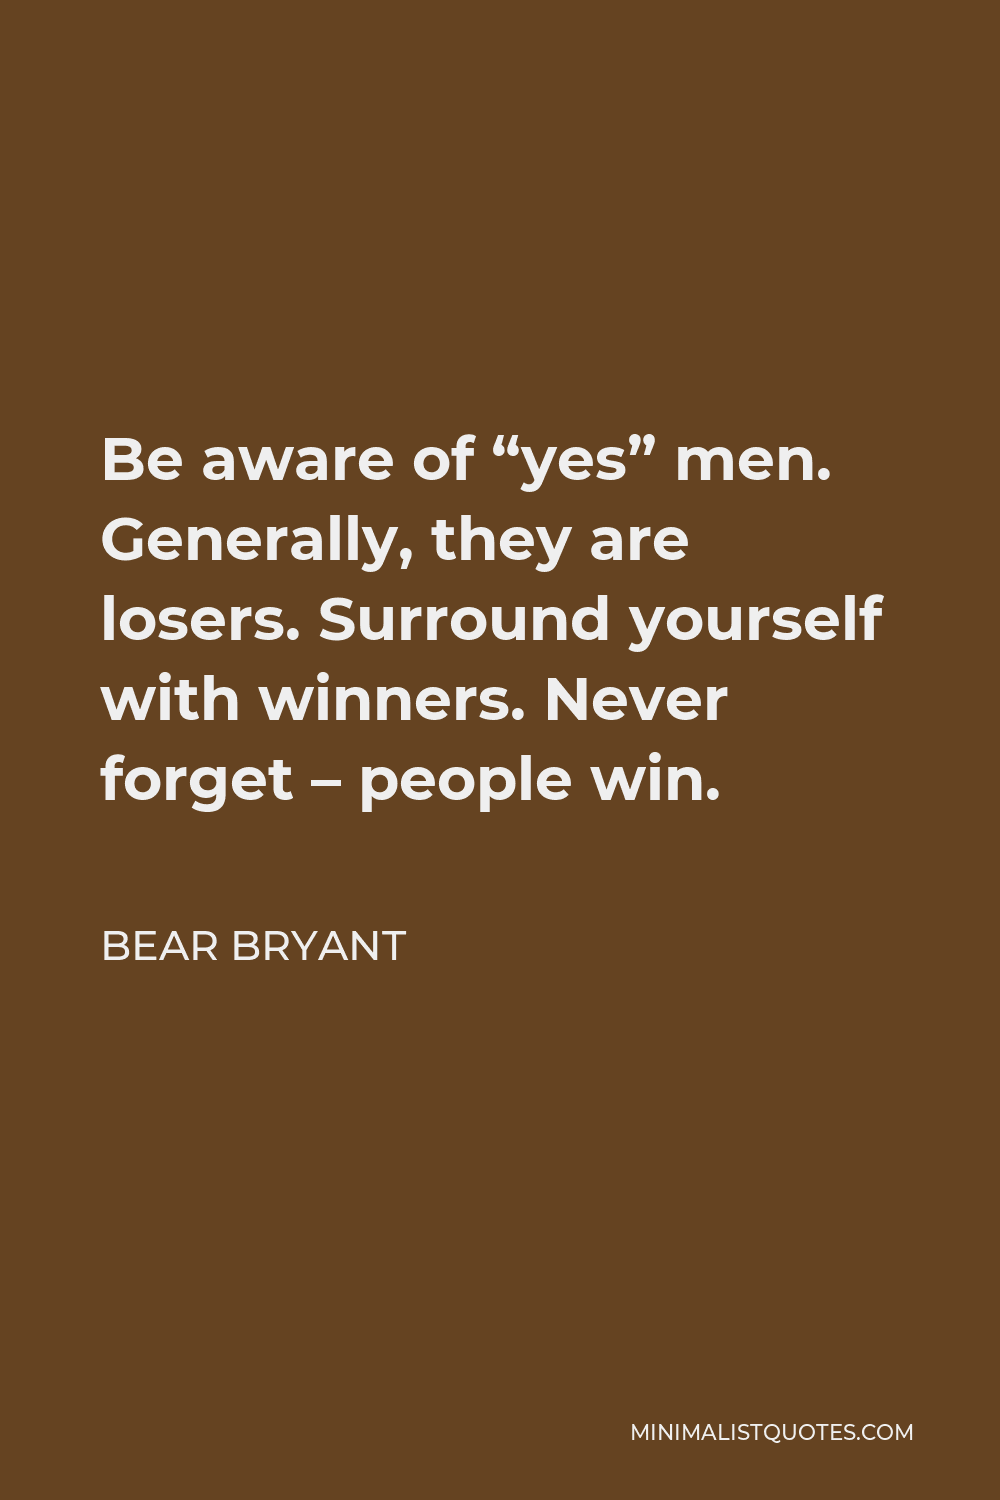 Bear Bryant Quote - Be aware of “yes” men. Generally, they are losers. Surround yourself with winners. Never forget – people win.